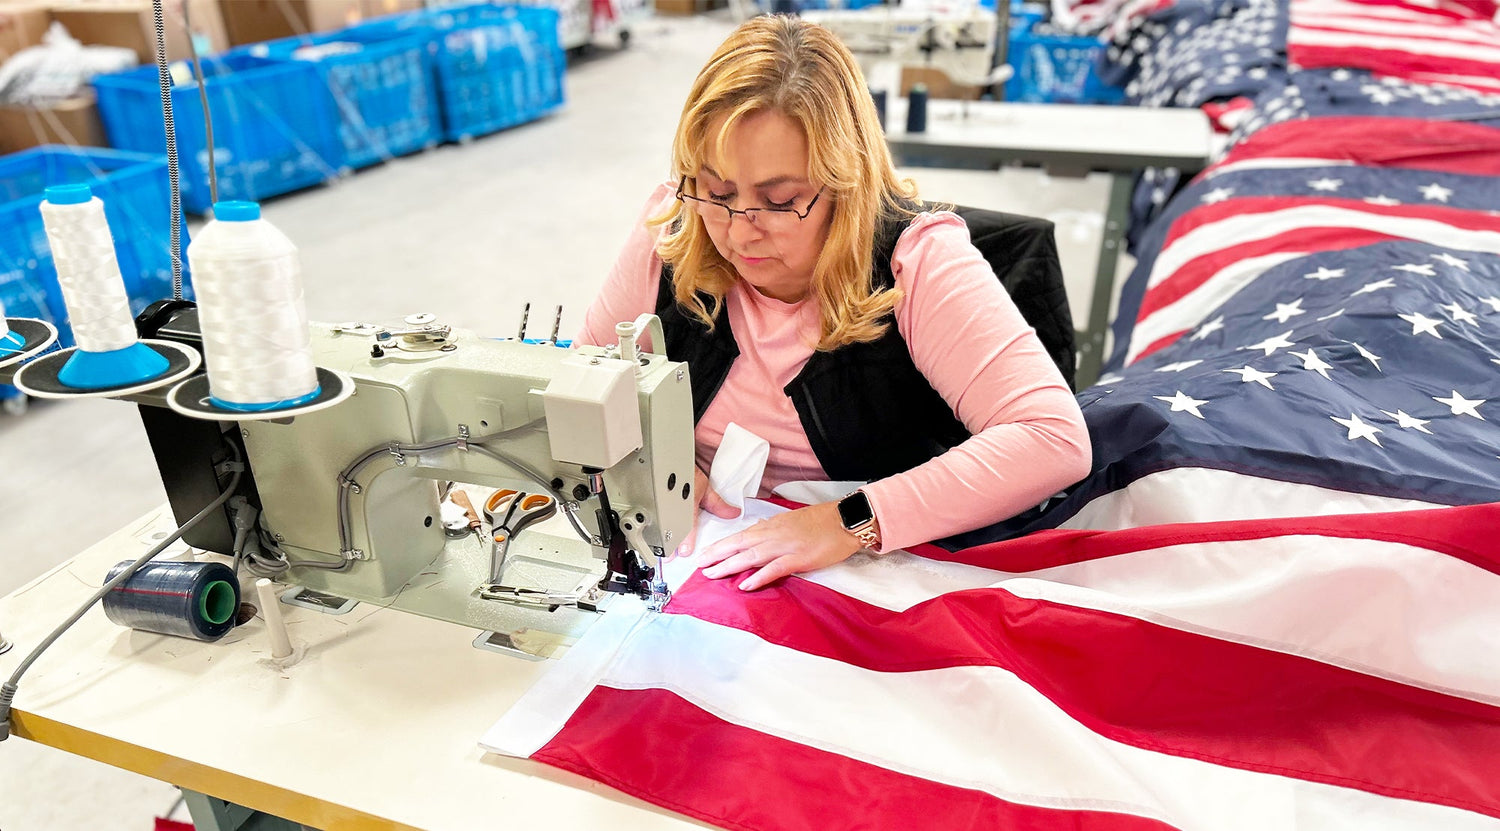 A woman works with a sewing machine to craft a long-lasting American flag in a workshop, proudly displaying the "Made in USA" label, with blue storage bins in the background.